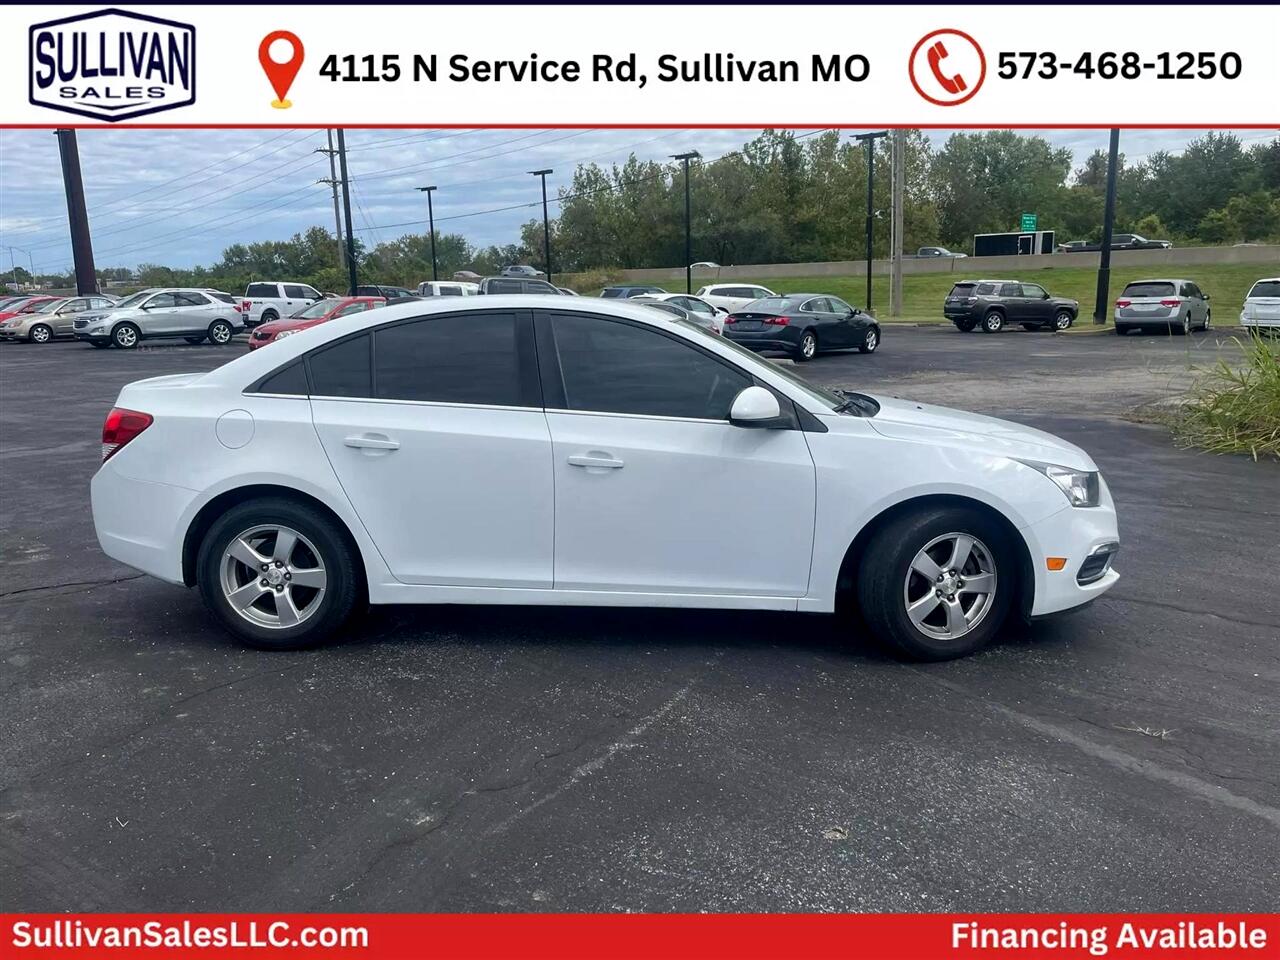 Used 2015 Chevrolet Cruze 1LT with VIN 1G1PC5SB8F7226054 for sale in Sullivan, MO